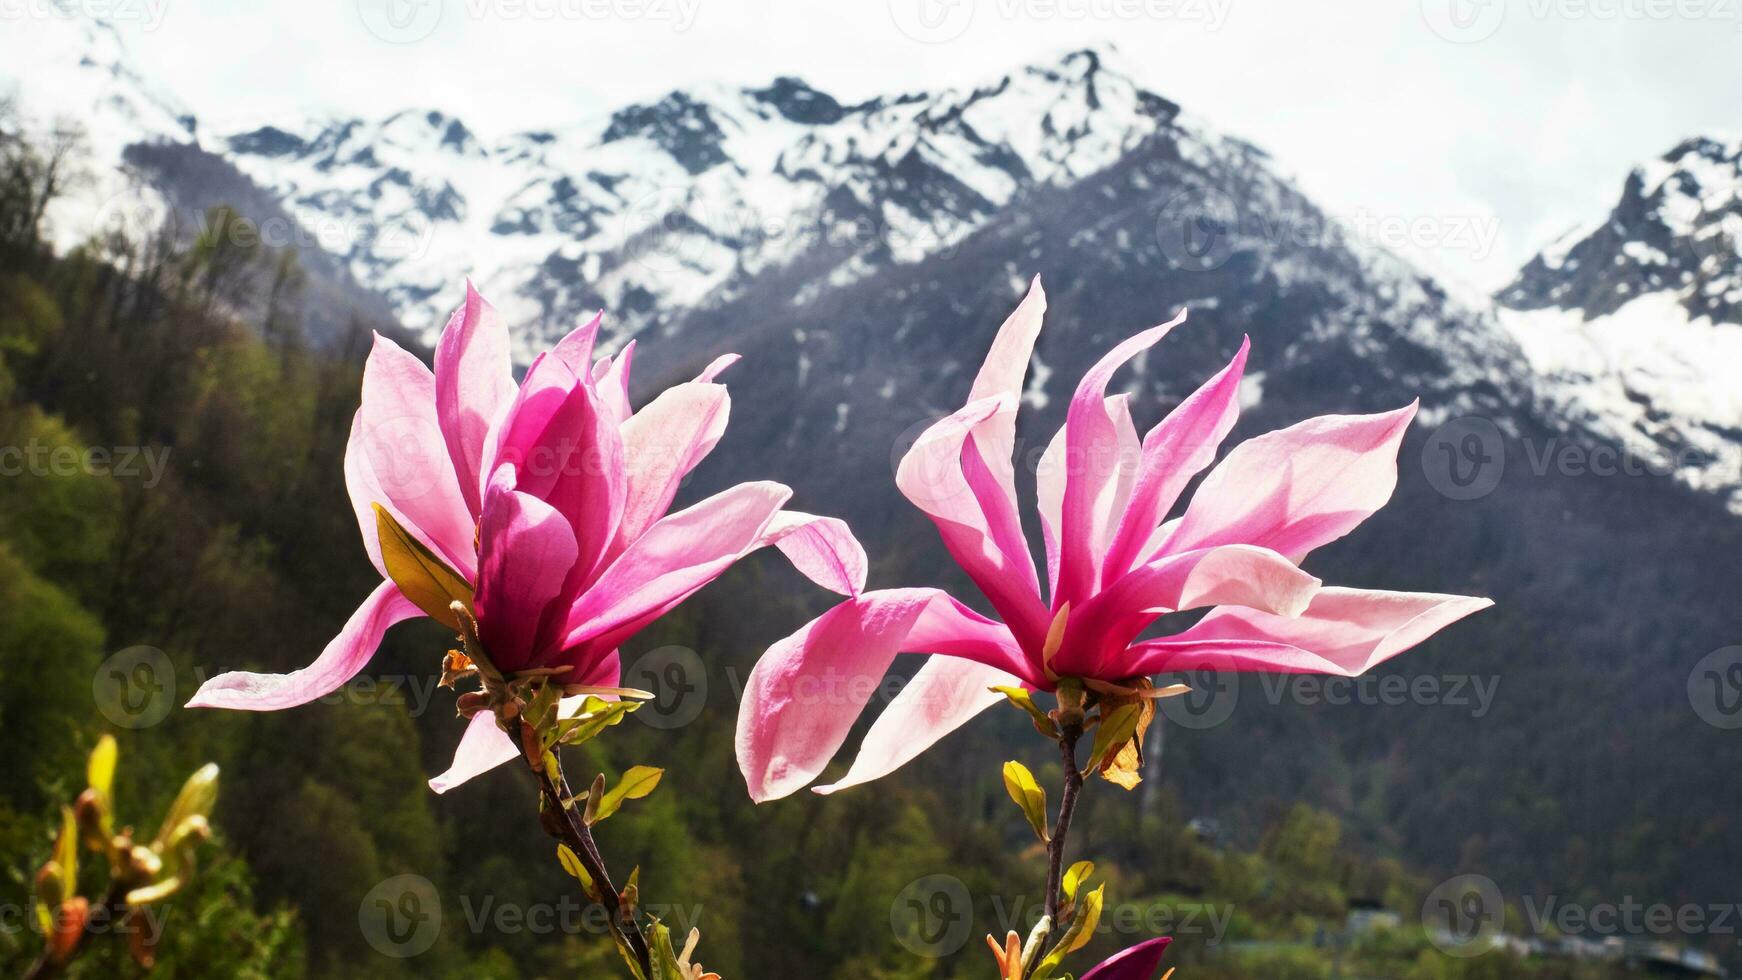 Pink magnolia flowers blooming tree in the wild against the background of snowy mountains. Magnolia stellata, selective focus. photo